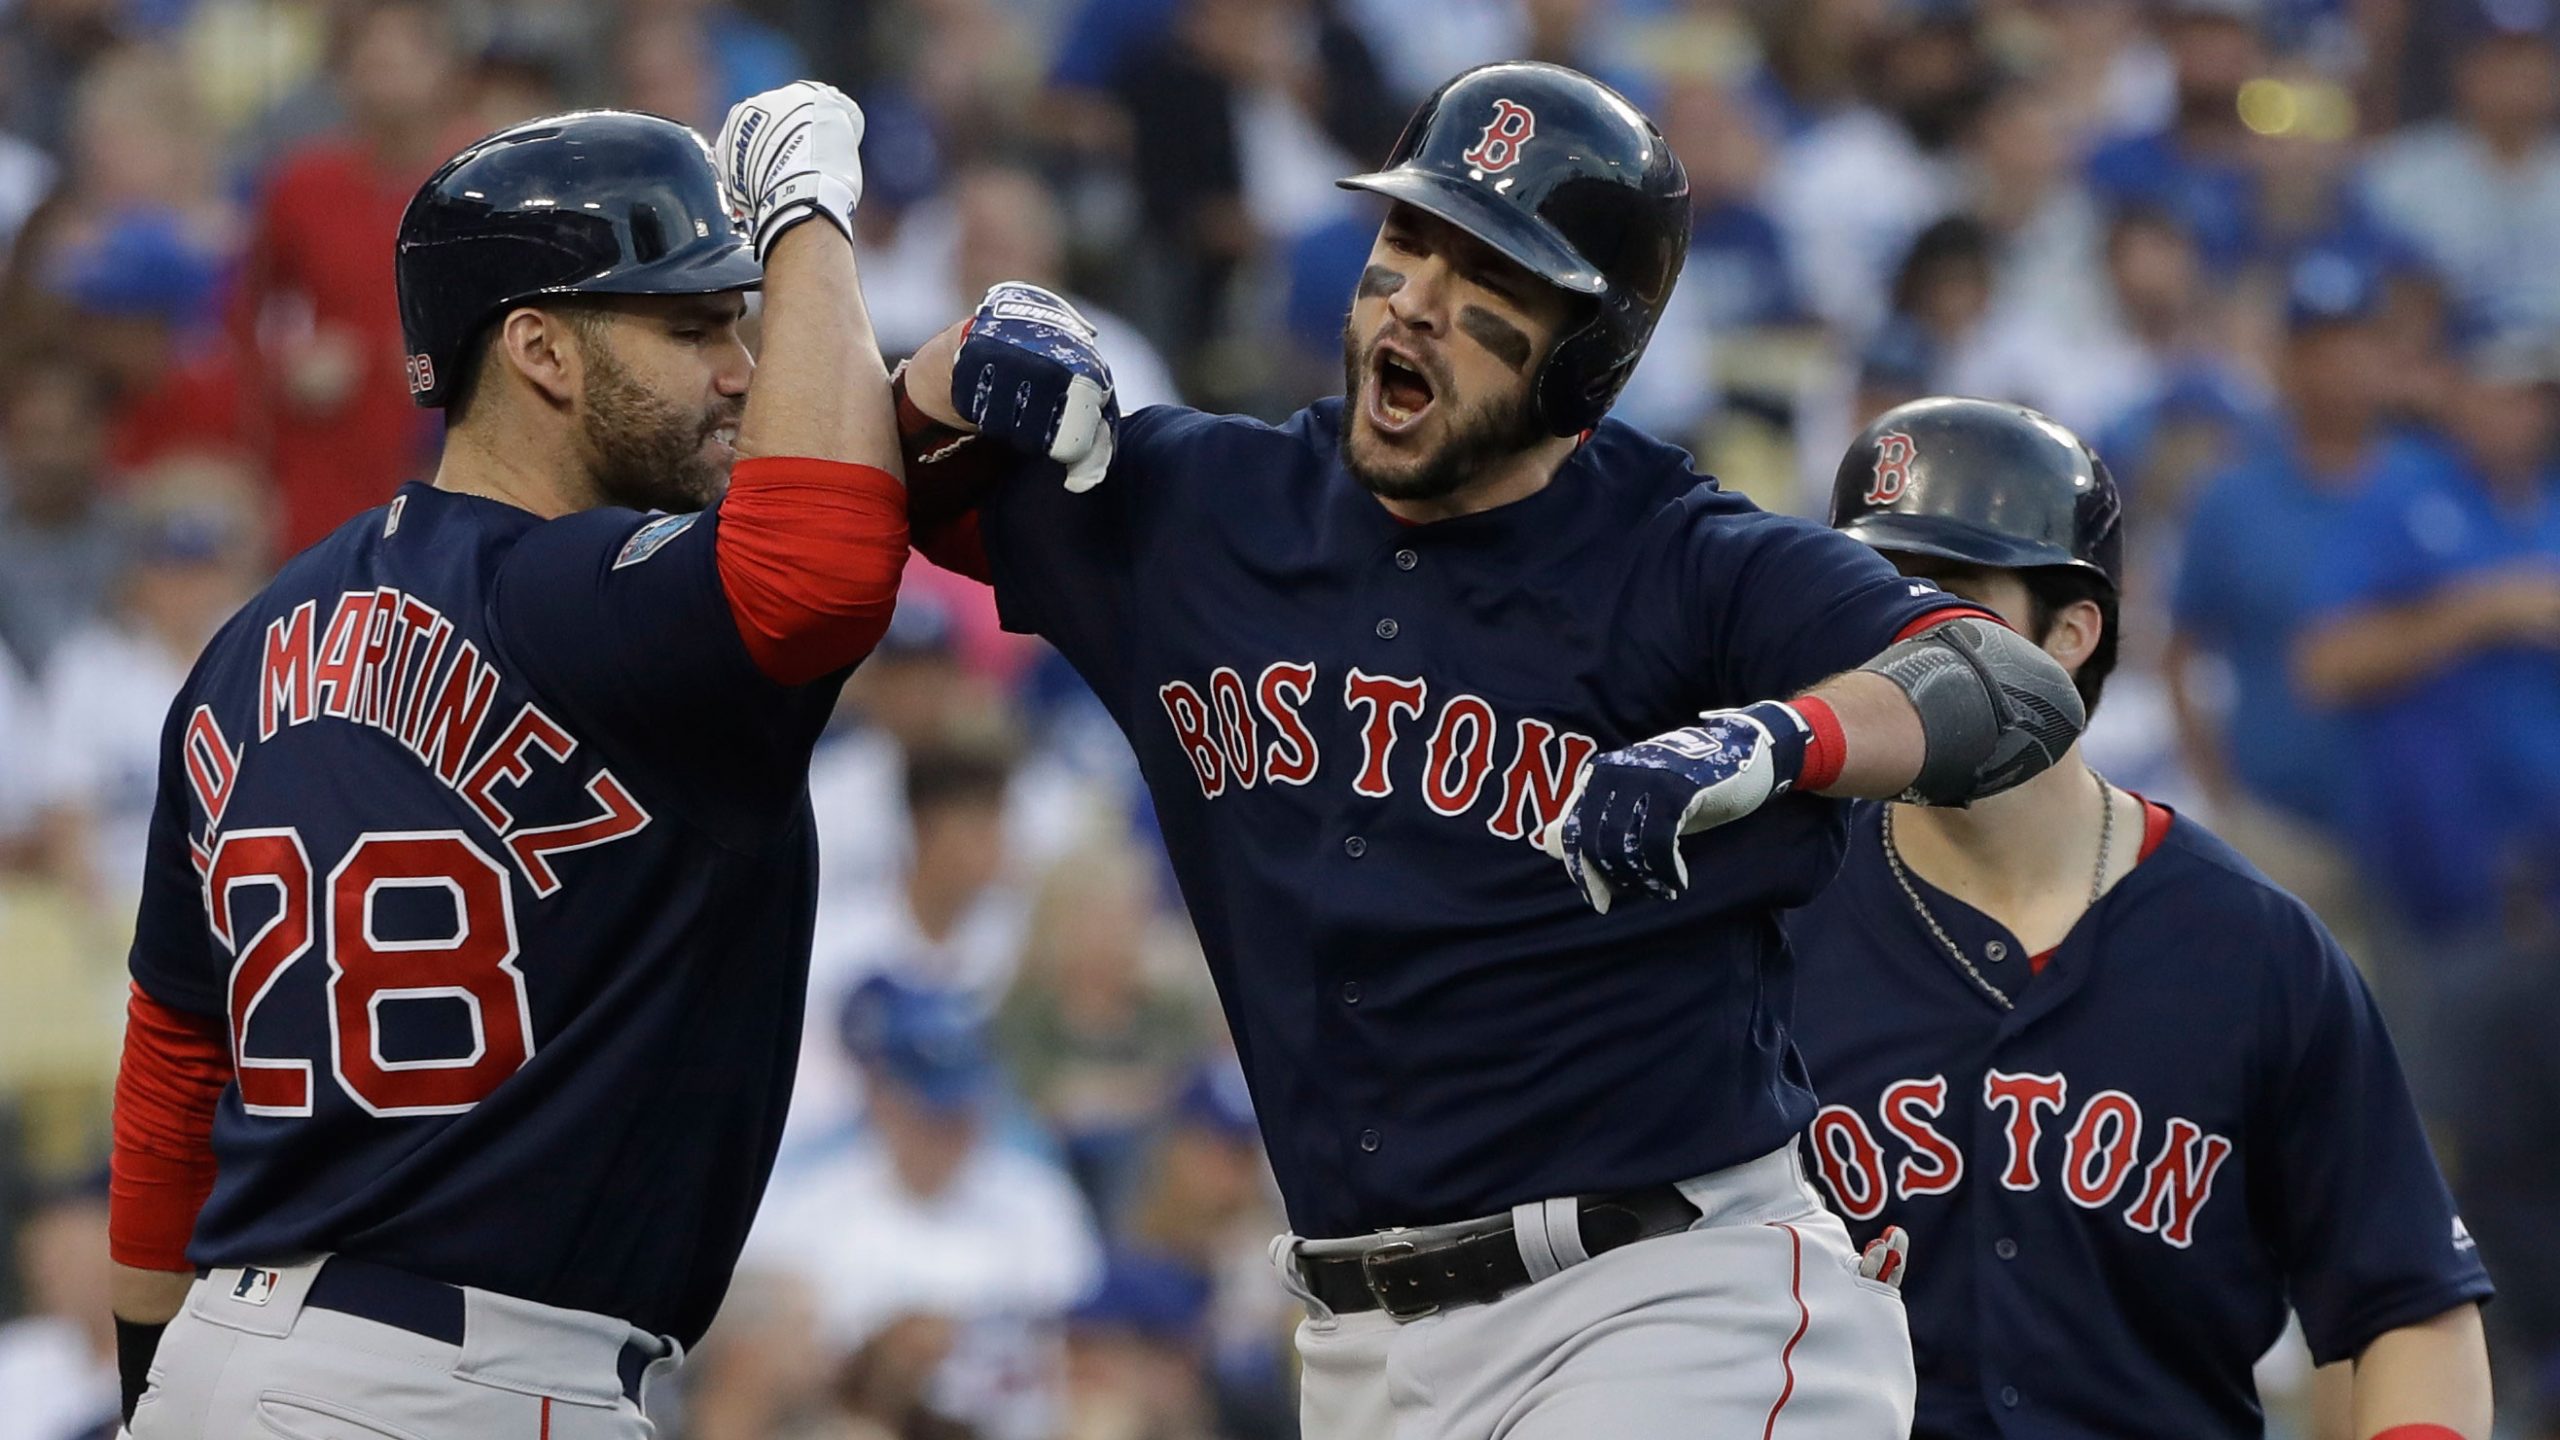 Red Sox beat Dodgers 5-1 in Game 5 to win World Series title